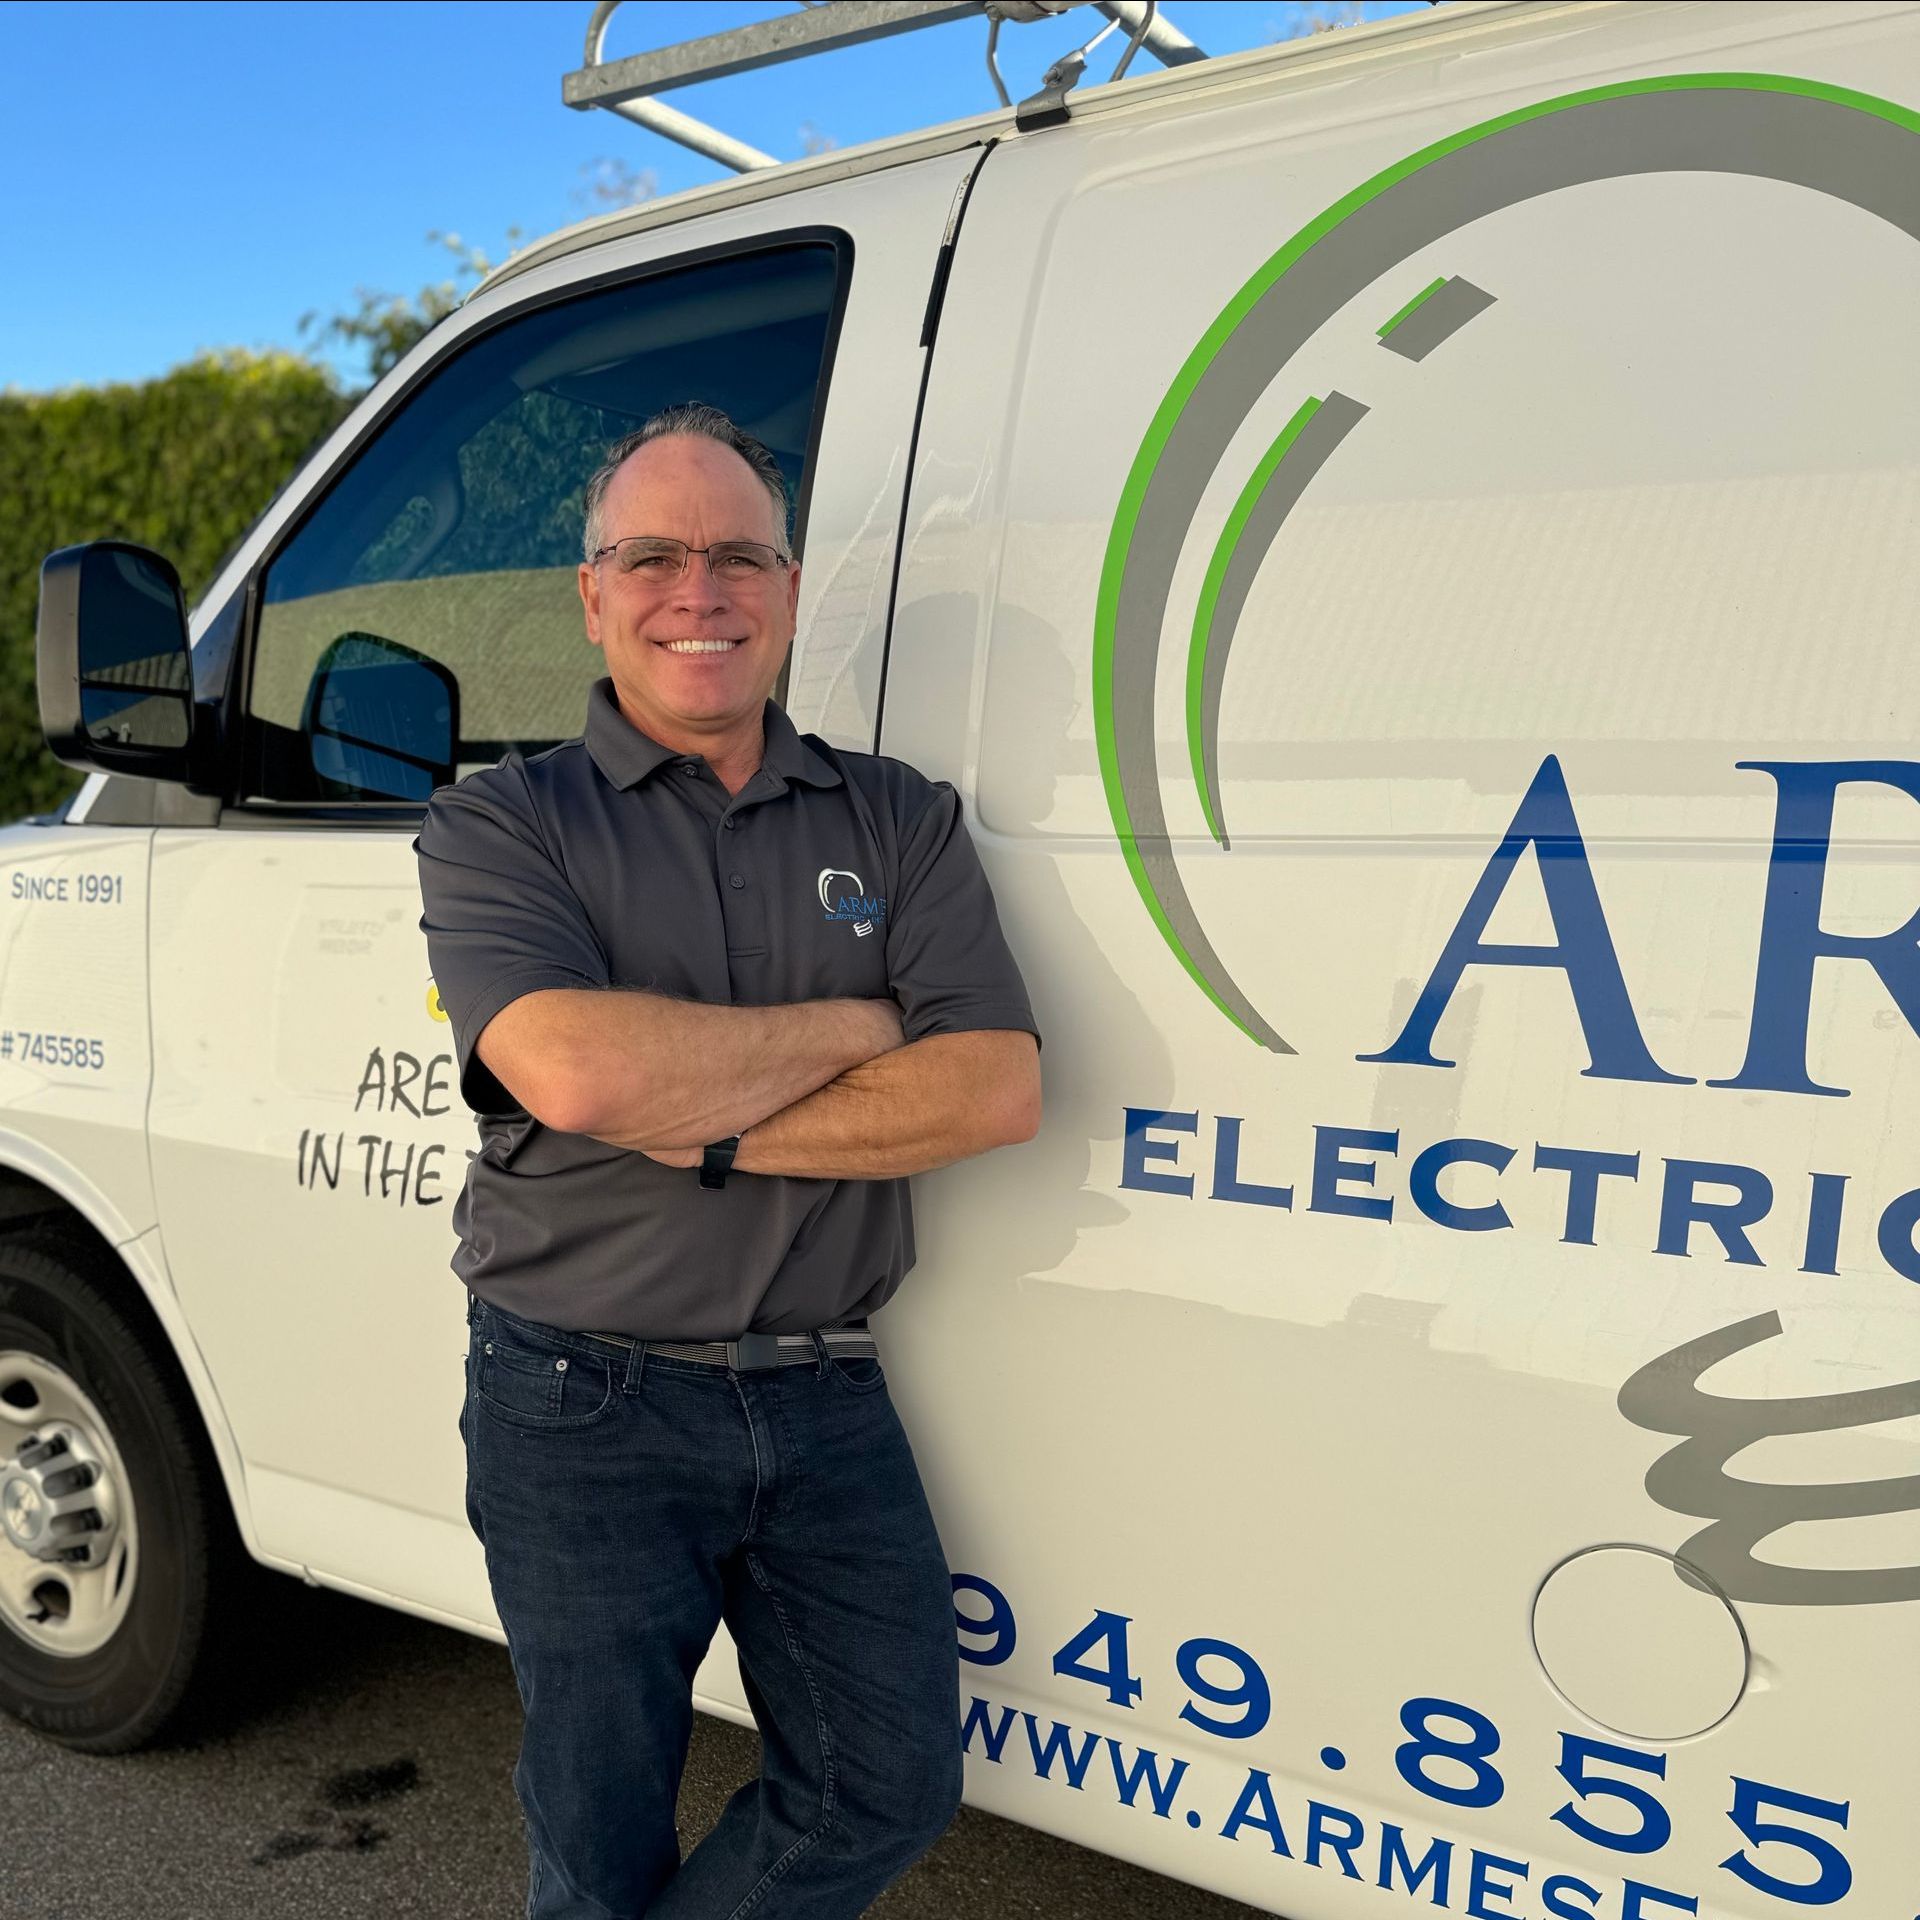 a man stands in front of an arm electric van